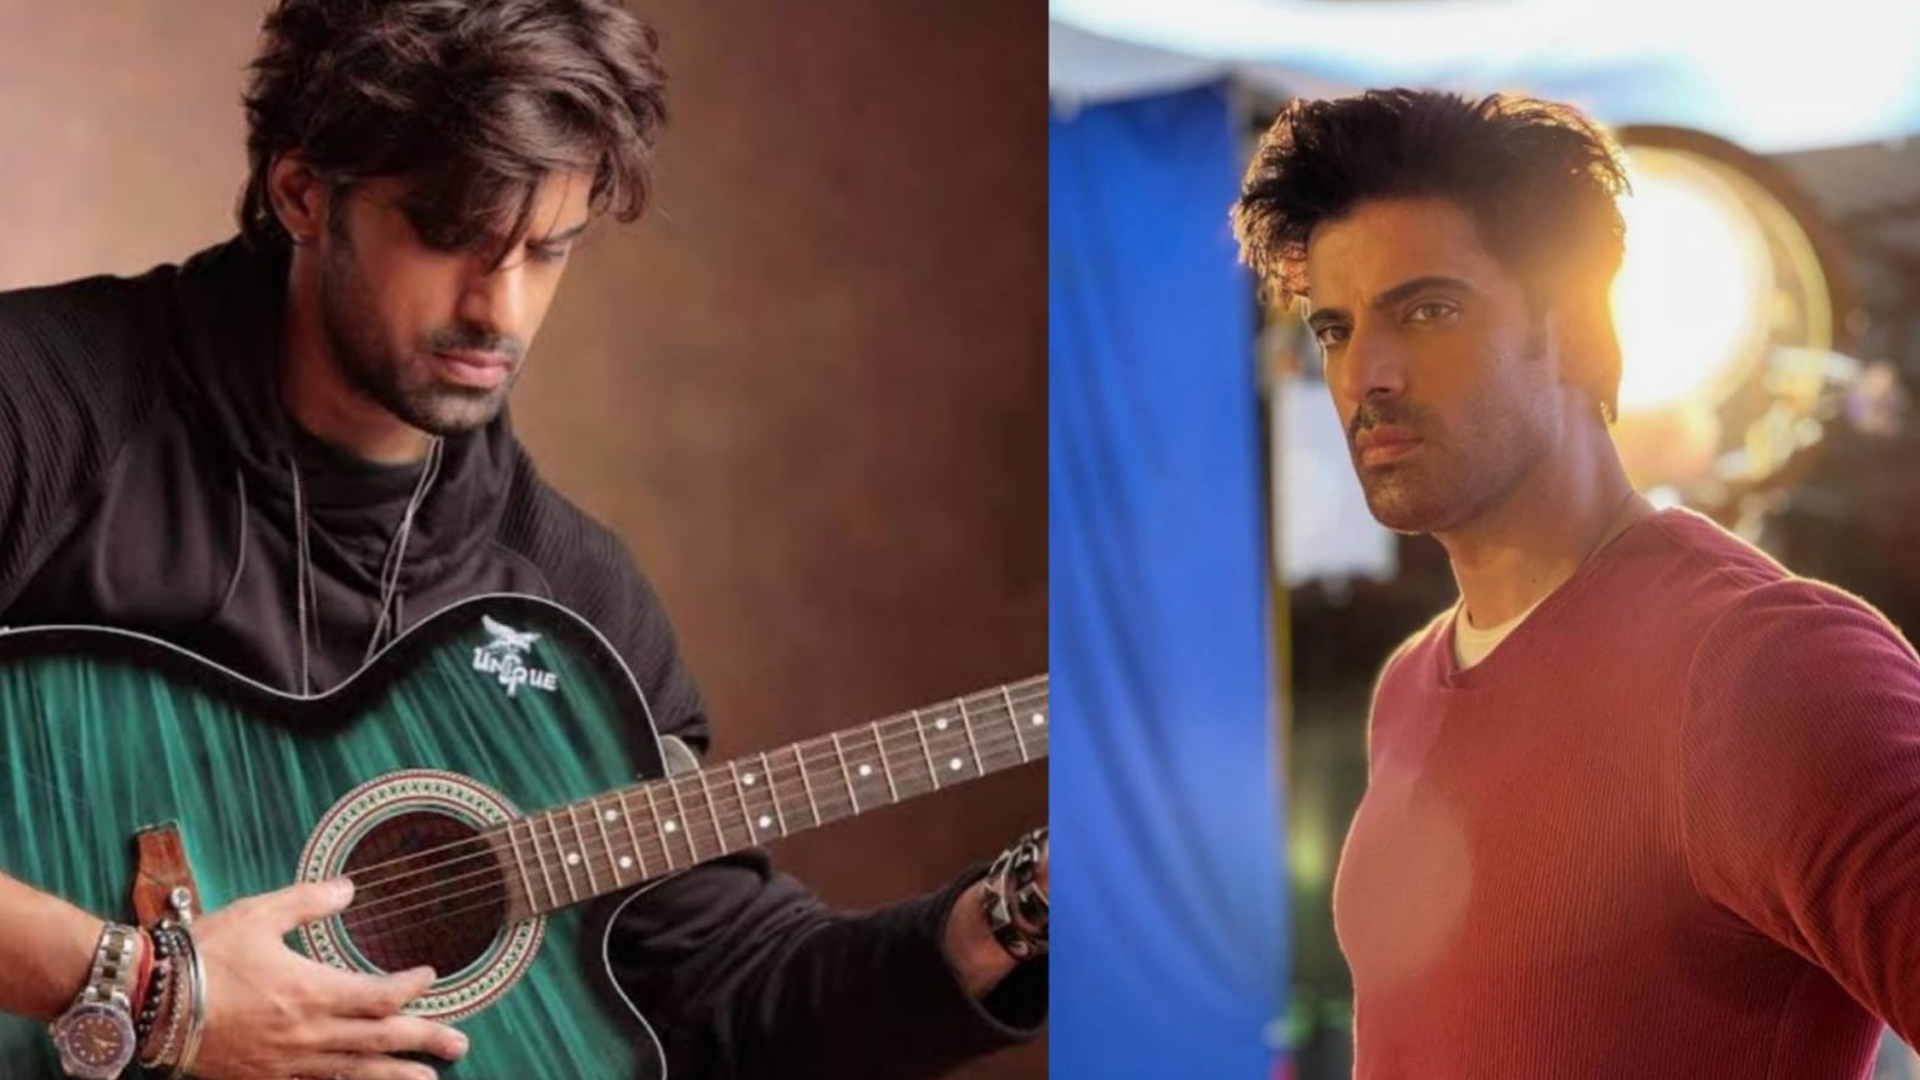 “Music helps me better express my emotions and motivates me to attain perfection in my character” shares Mohit Malik from Star Plus show Baatein Kuch Ankahee Si